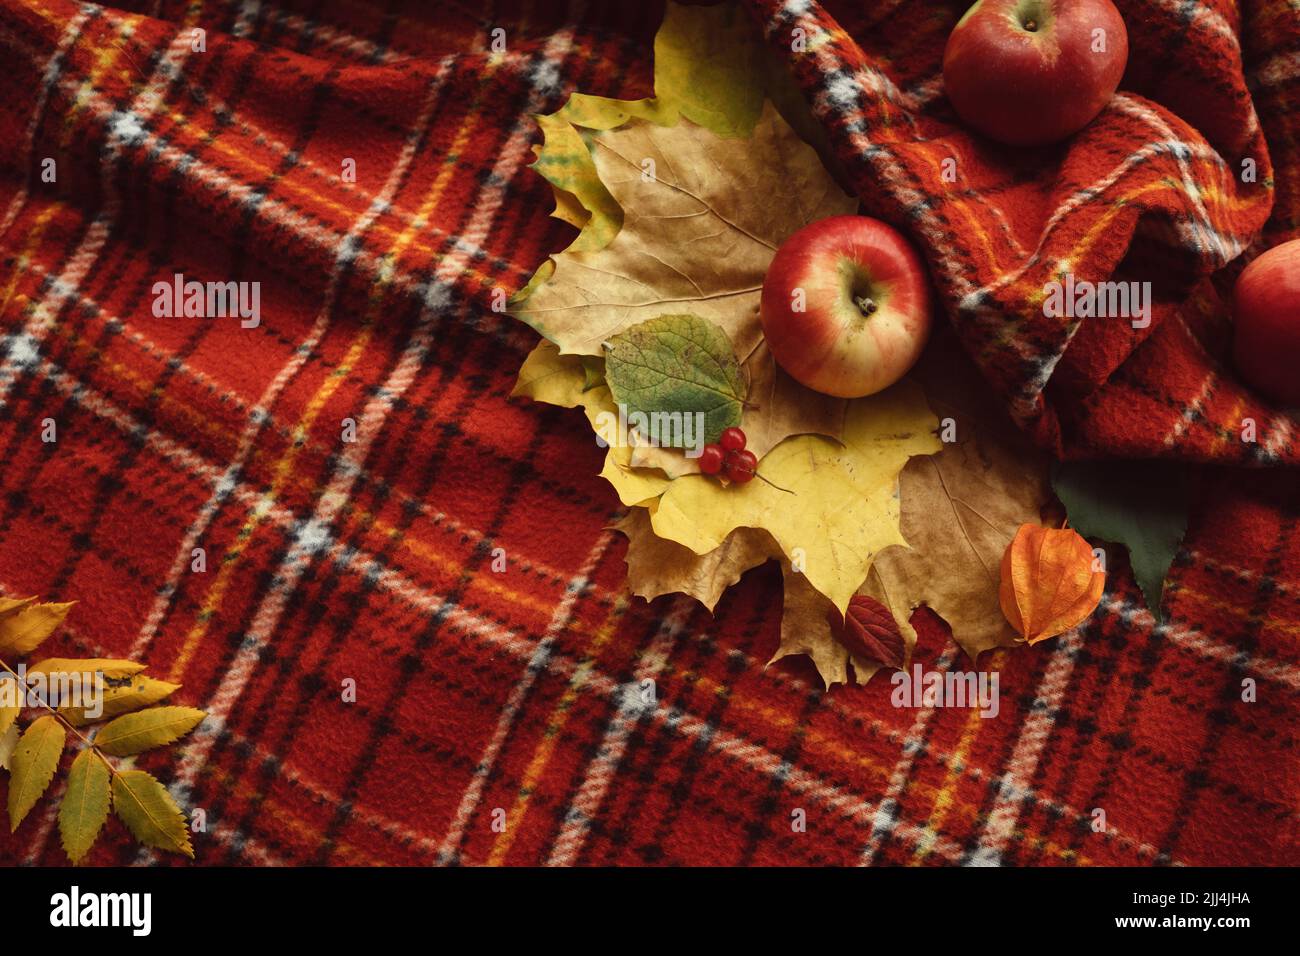 autumn leaves fall apples warm blanket concept Stock Photo